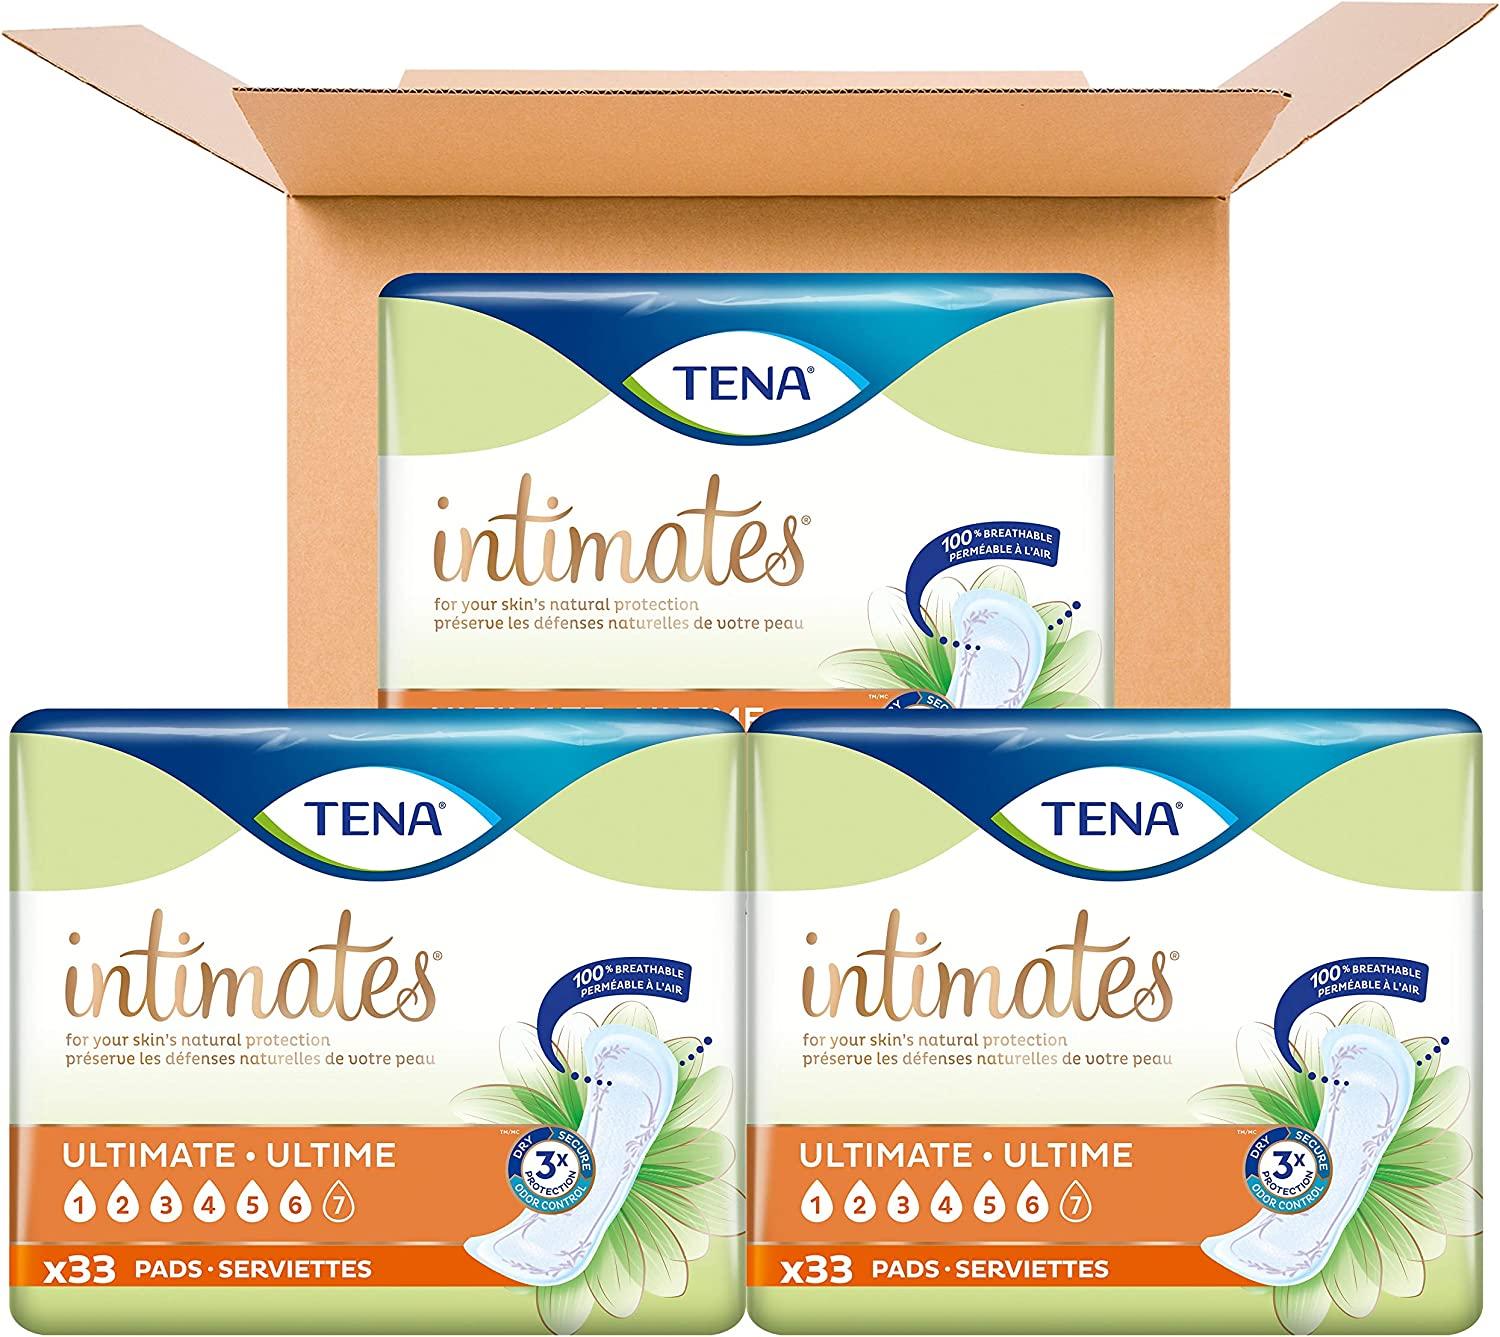  Tena For Men Level 2 Odour Control Incontinence Pads, 10 Pads  by Tena : Health & Household